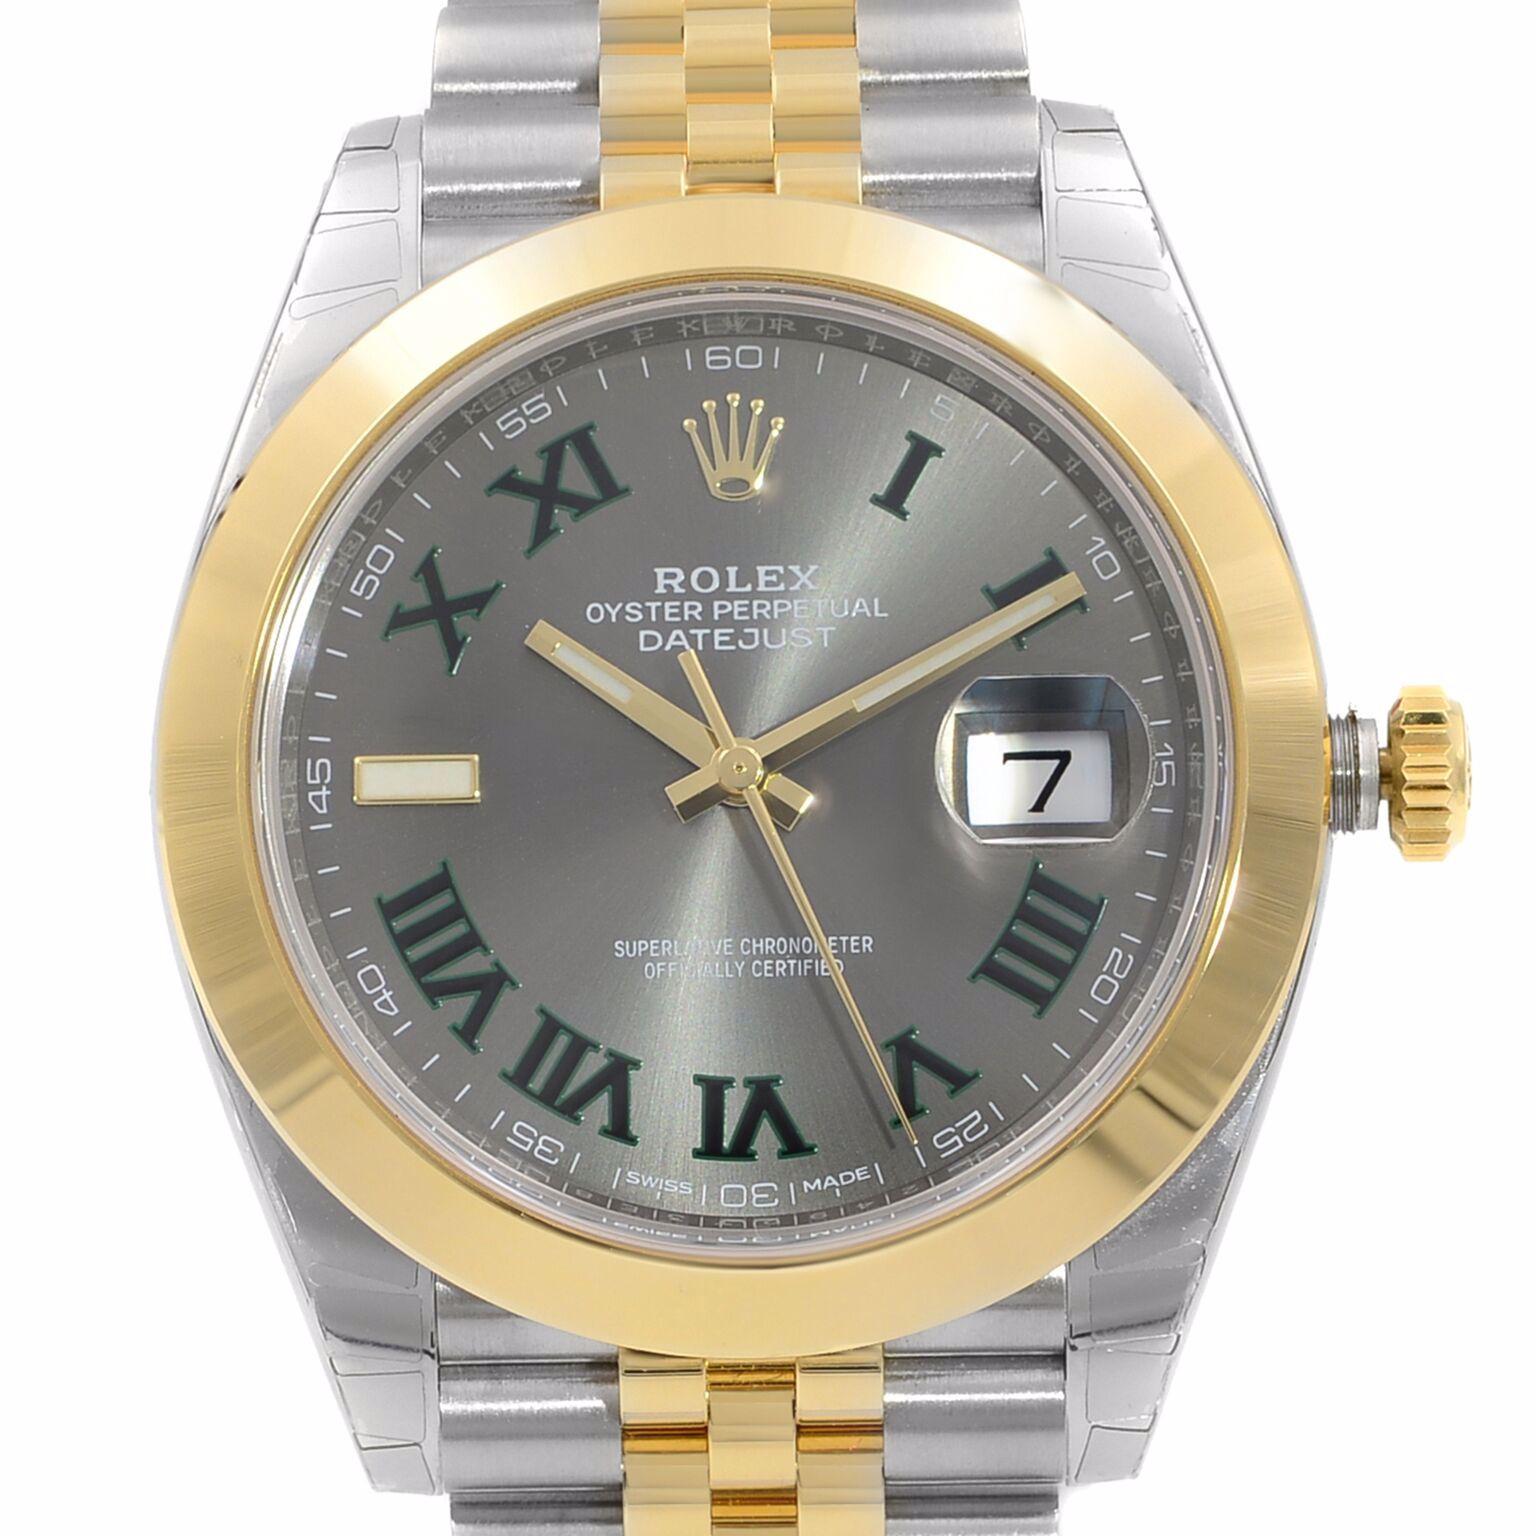 This brand new Rolex Datejust 126303-SLTRJ is a beautiful men's timepiece that is powered by mechanical (automatic) movement which is cased in a stainless steel case. It has a round shape face, date indicator dial and has hand roman numerals style